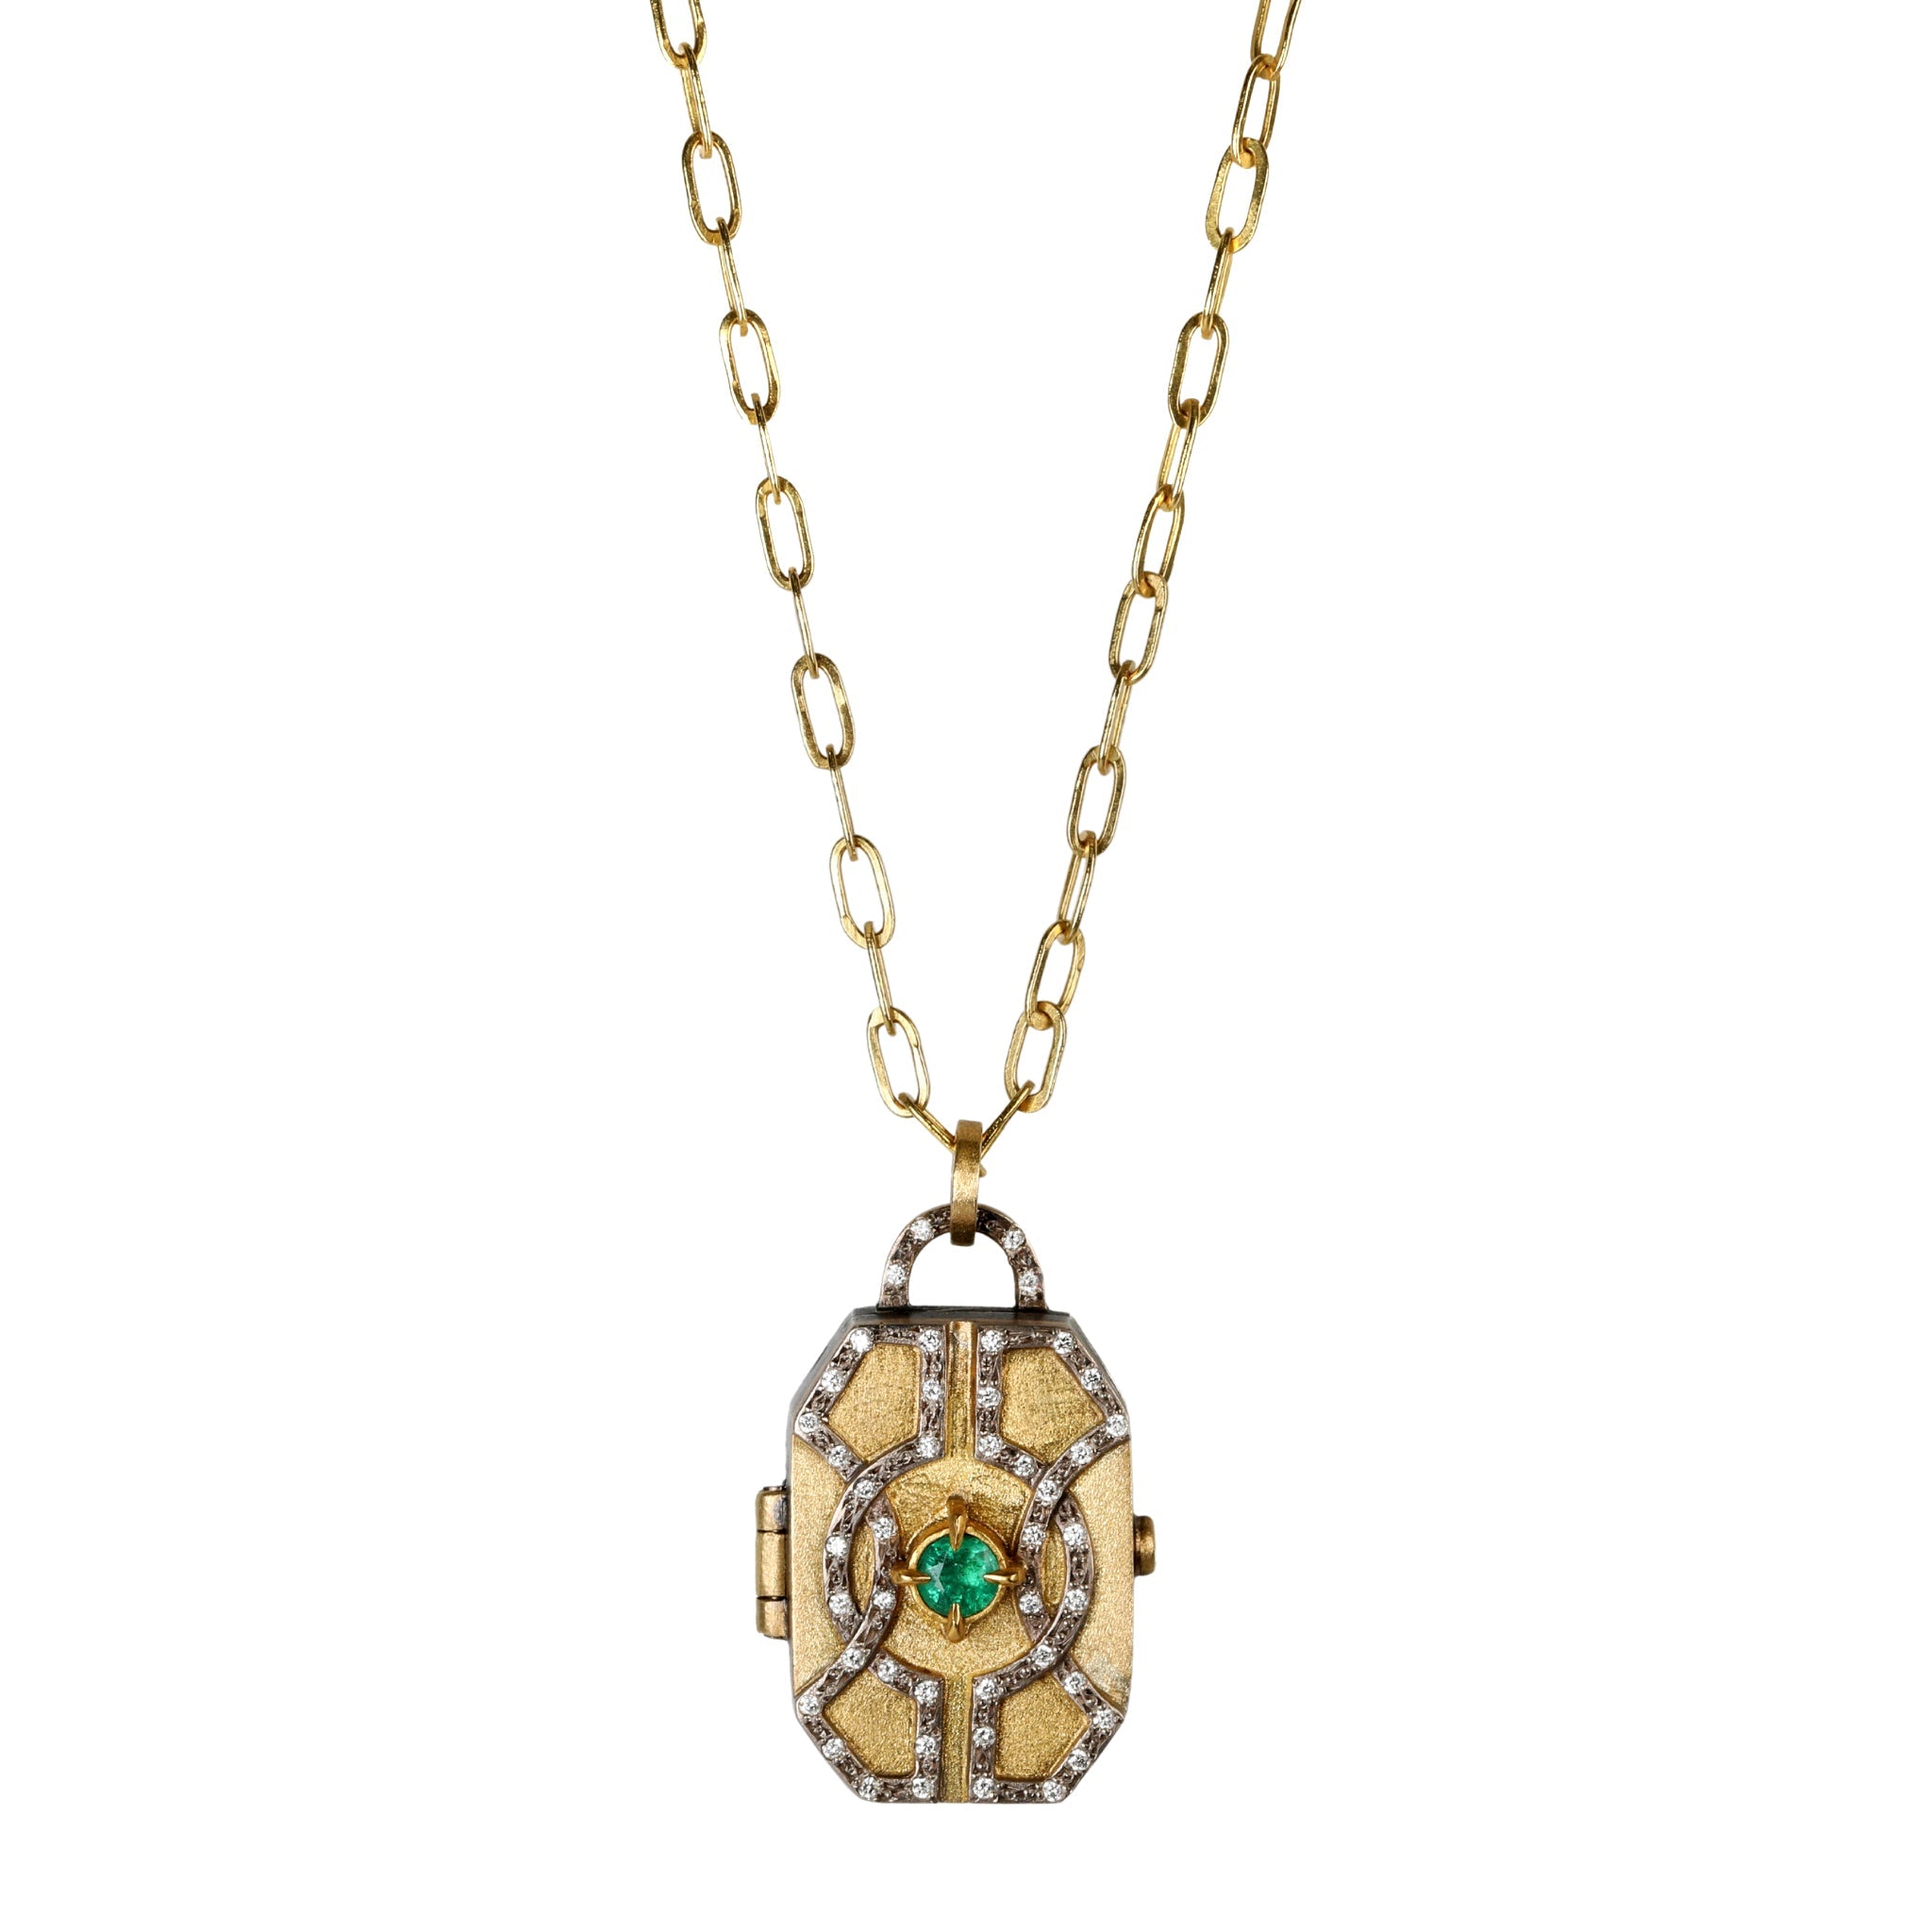 22 &amp; 18K Gold Hand-Fabricated Locket with Center Emerald and Diamonds - Peridot Fine Jewelry - Annie Fensterstock